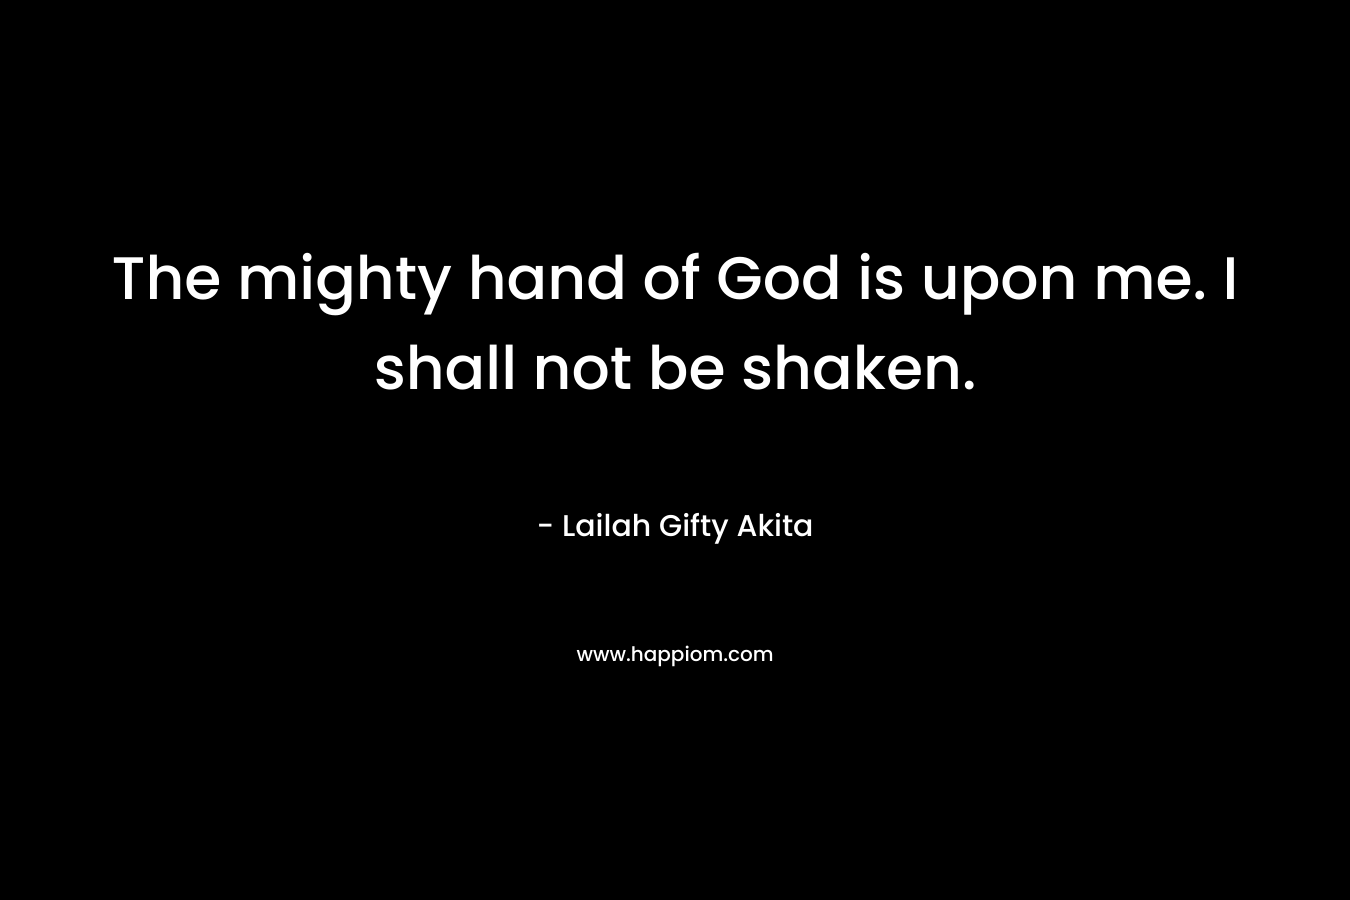 The mighty hand of God is upon me. I shall not be shaken.